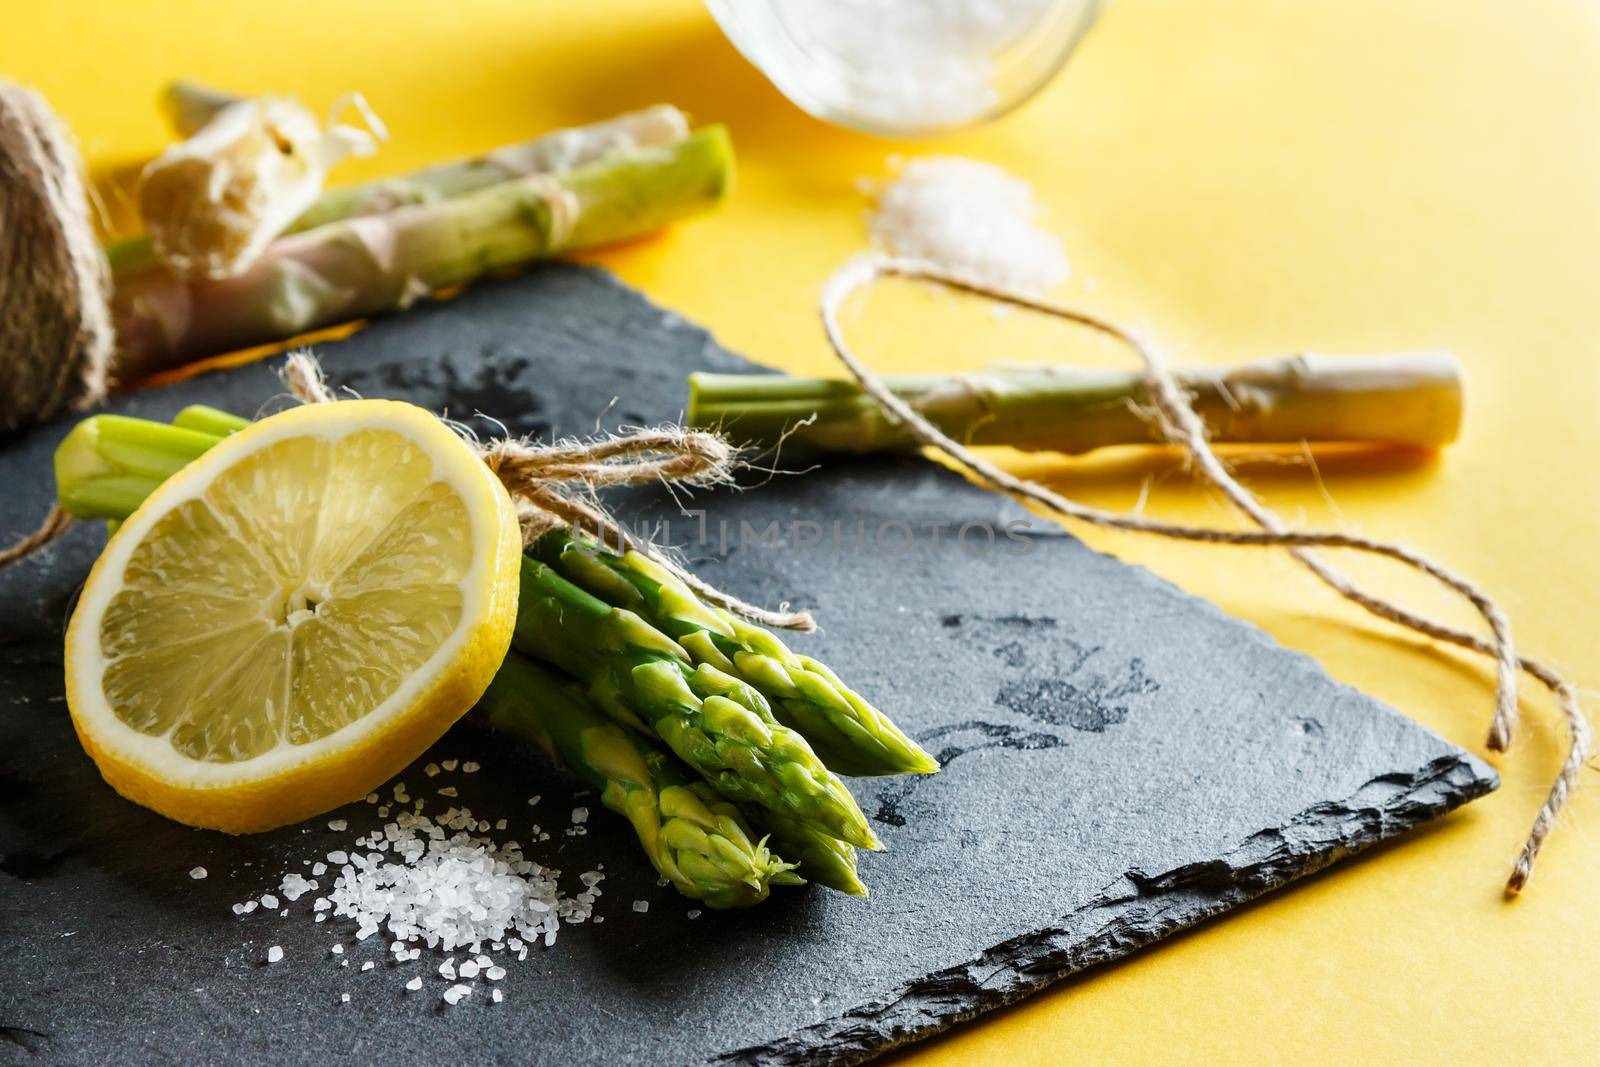 Asparagus. Bunch of fresh green asparagus close up with coarse salt and a slice of lemon on a slate plate on yellow background. Rope pieces and esparraggos cut to the bottom. Healthy vegetarian food. Horizontal image